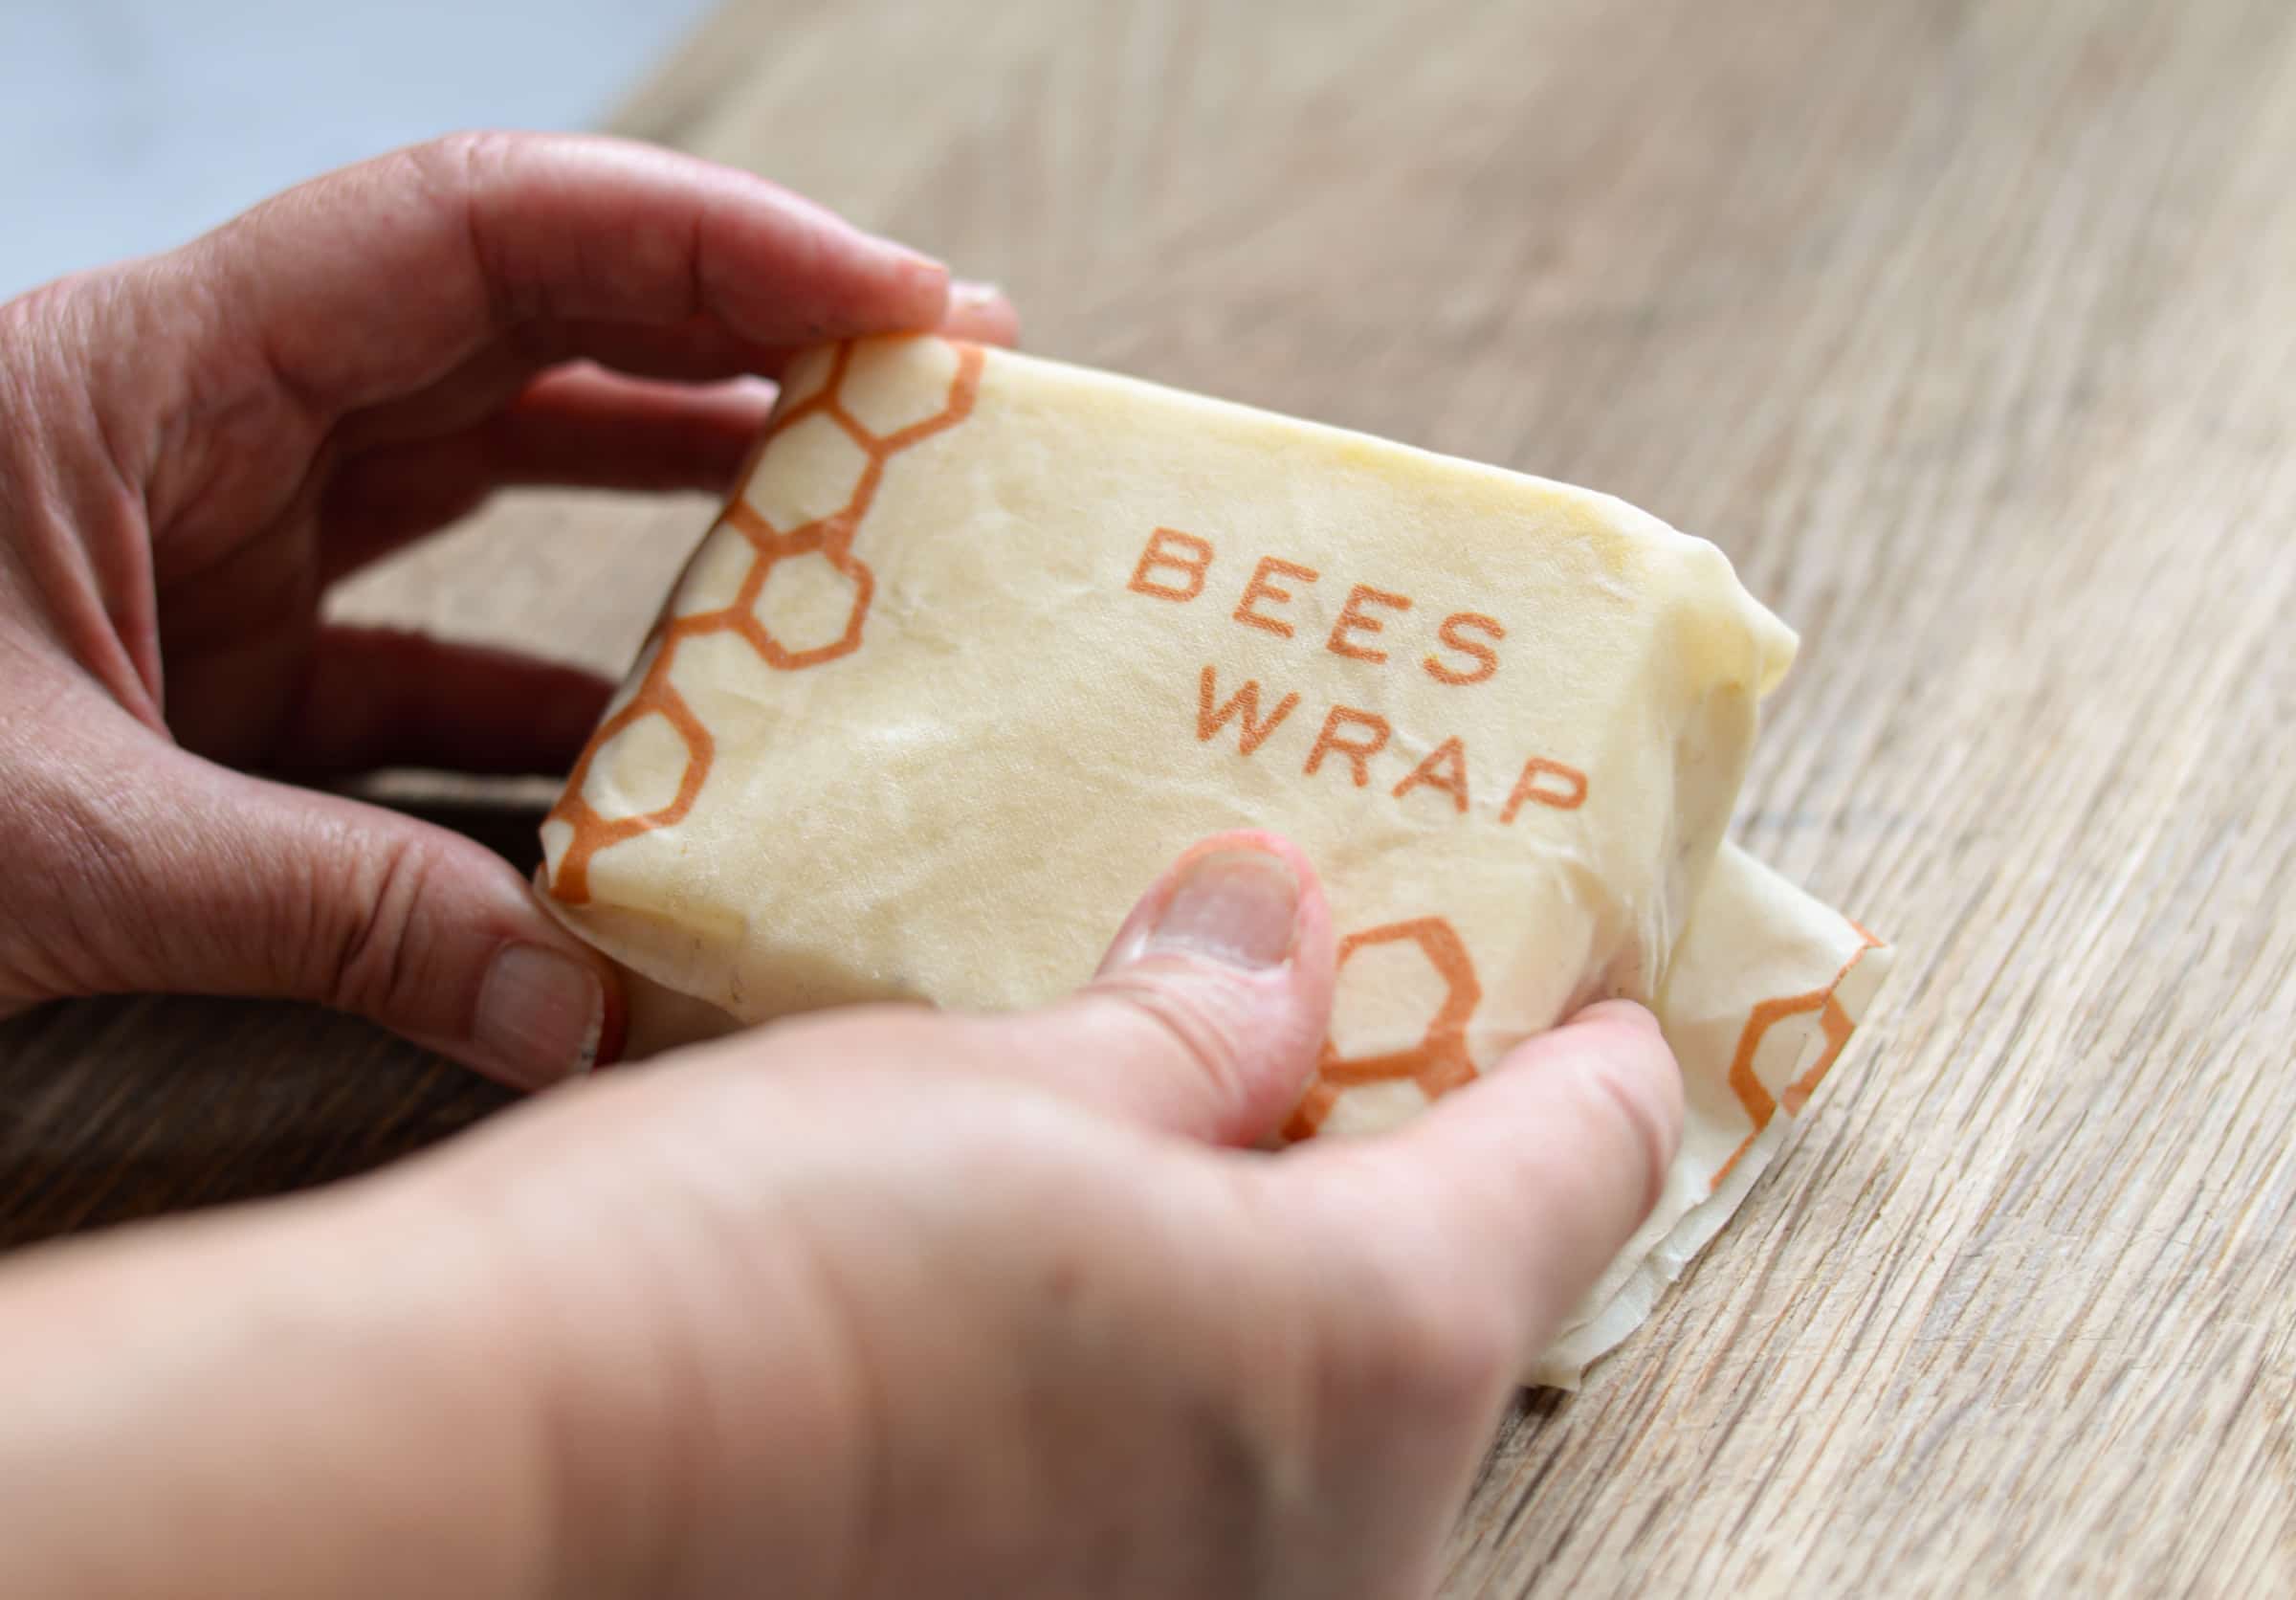 Sustainable bees wax packaging for cosmetic products.